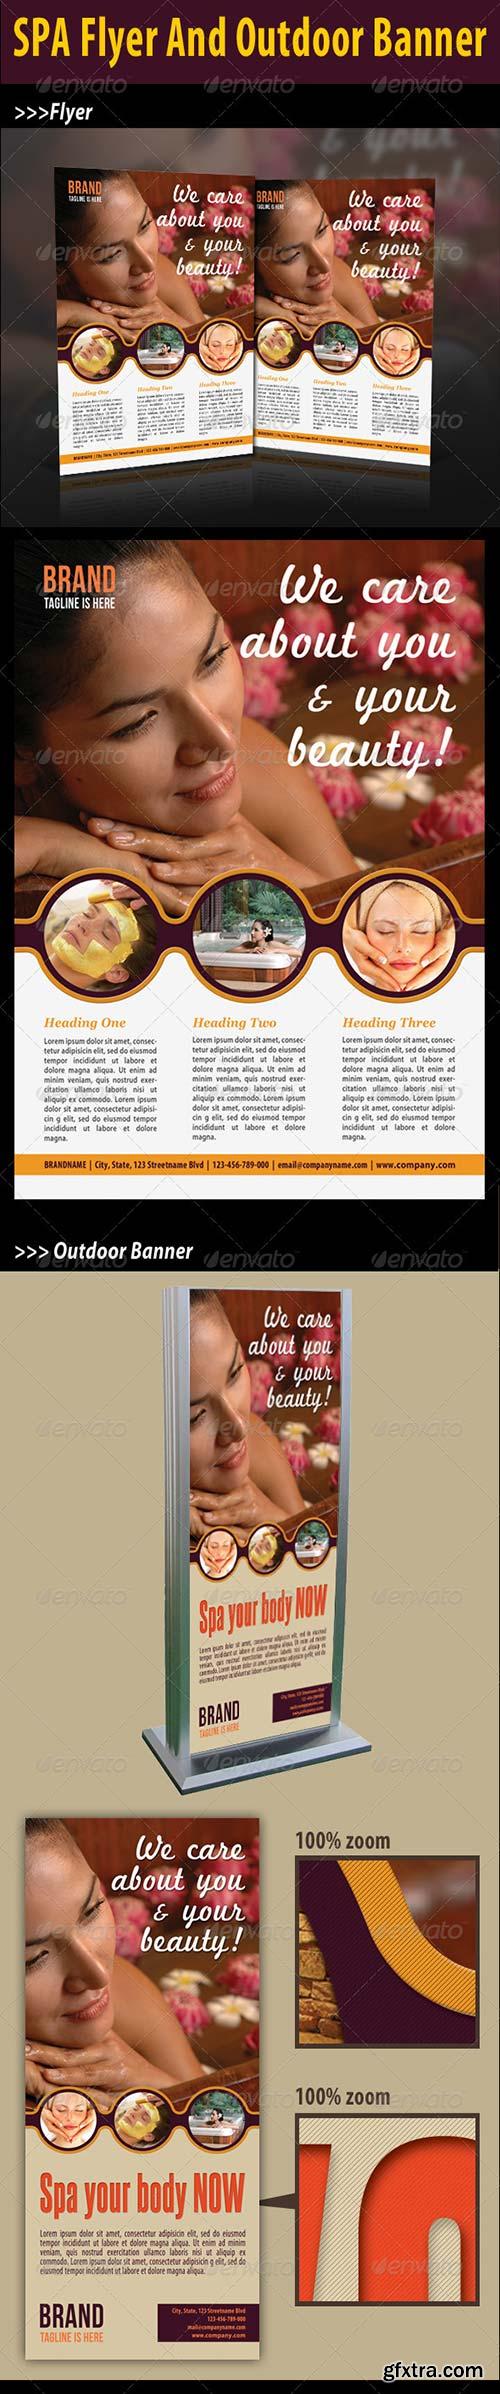 GraphicRiver - SPA Flyer And Outdoor Banner